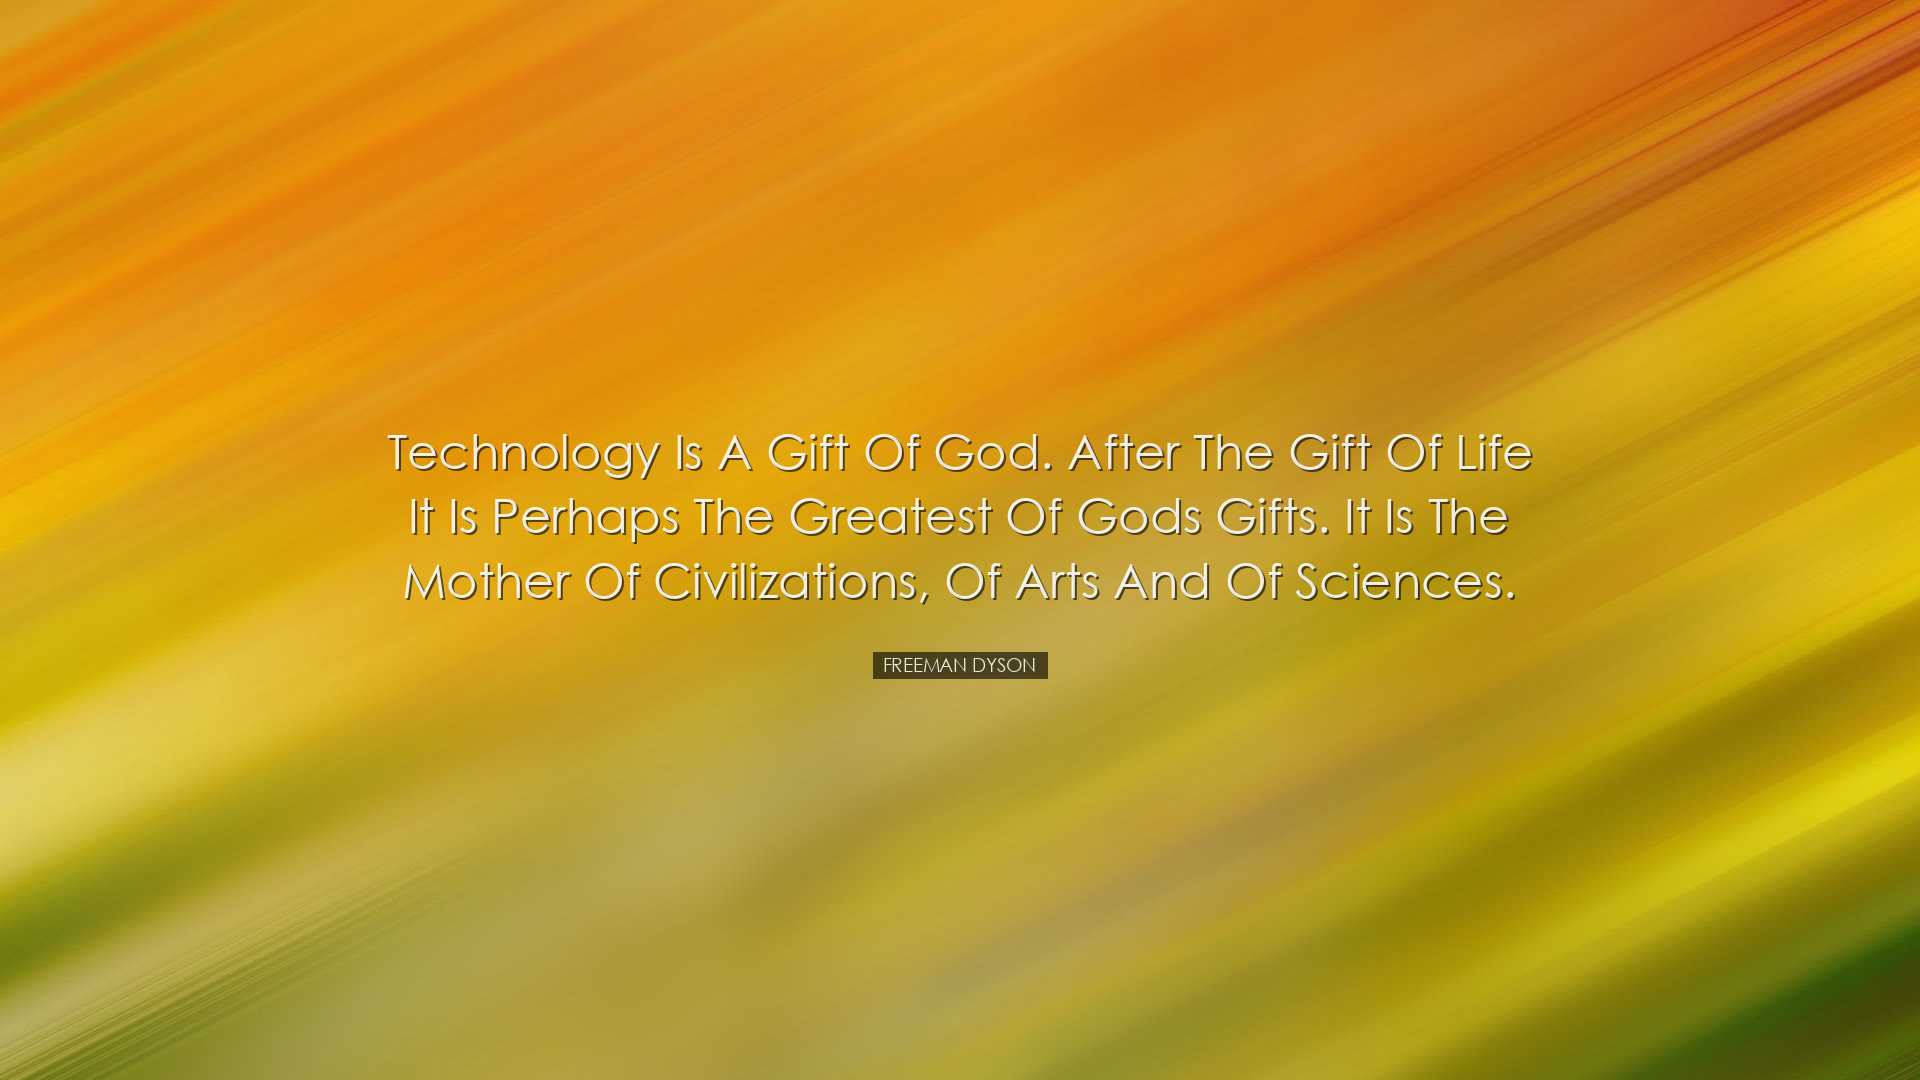 Technology is a gift of God. After the gift of life it is perhaps